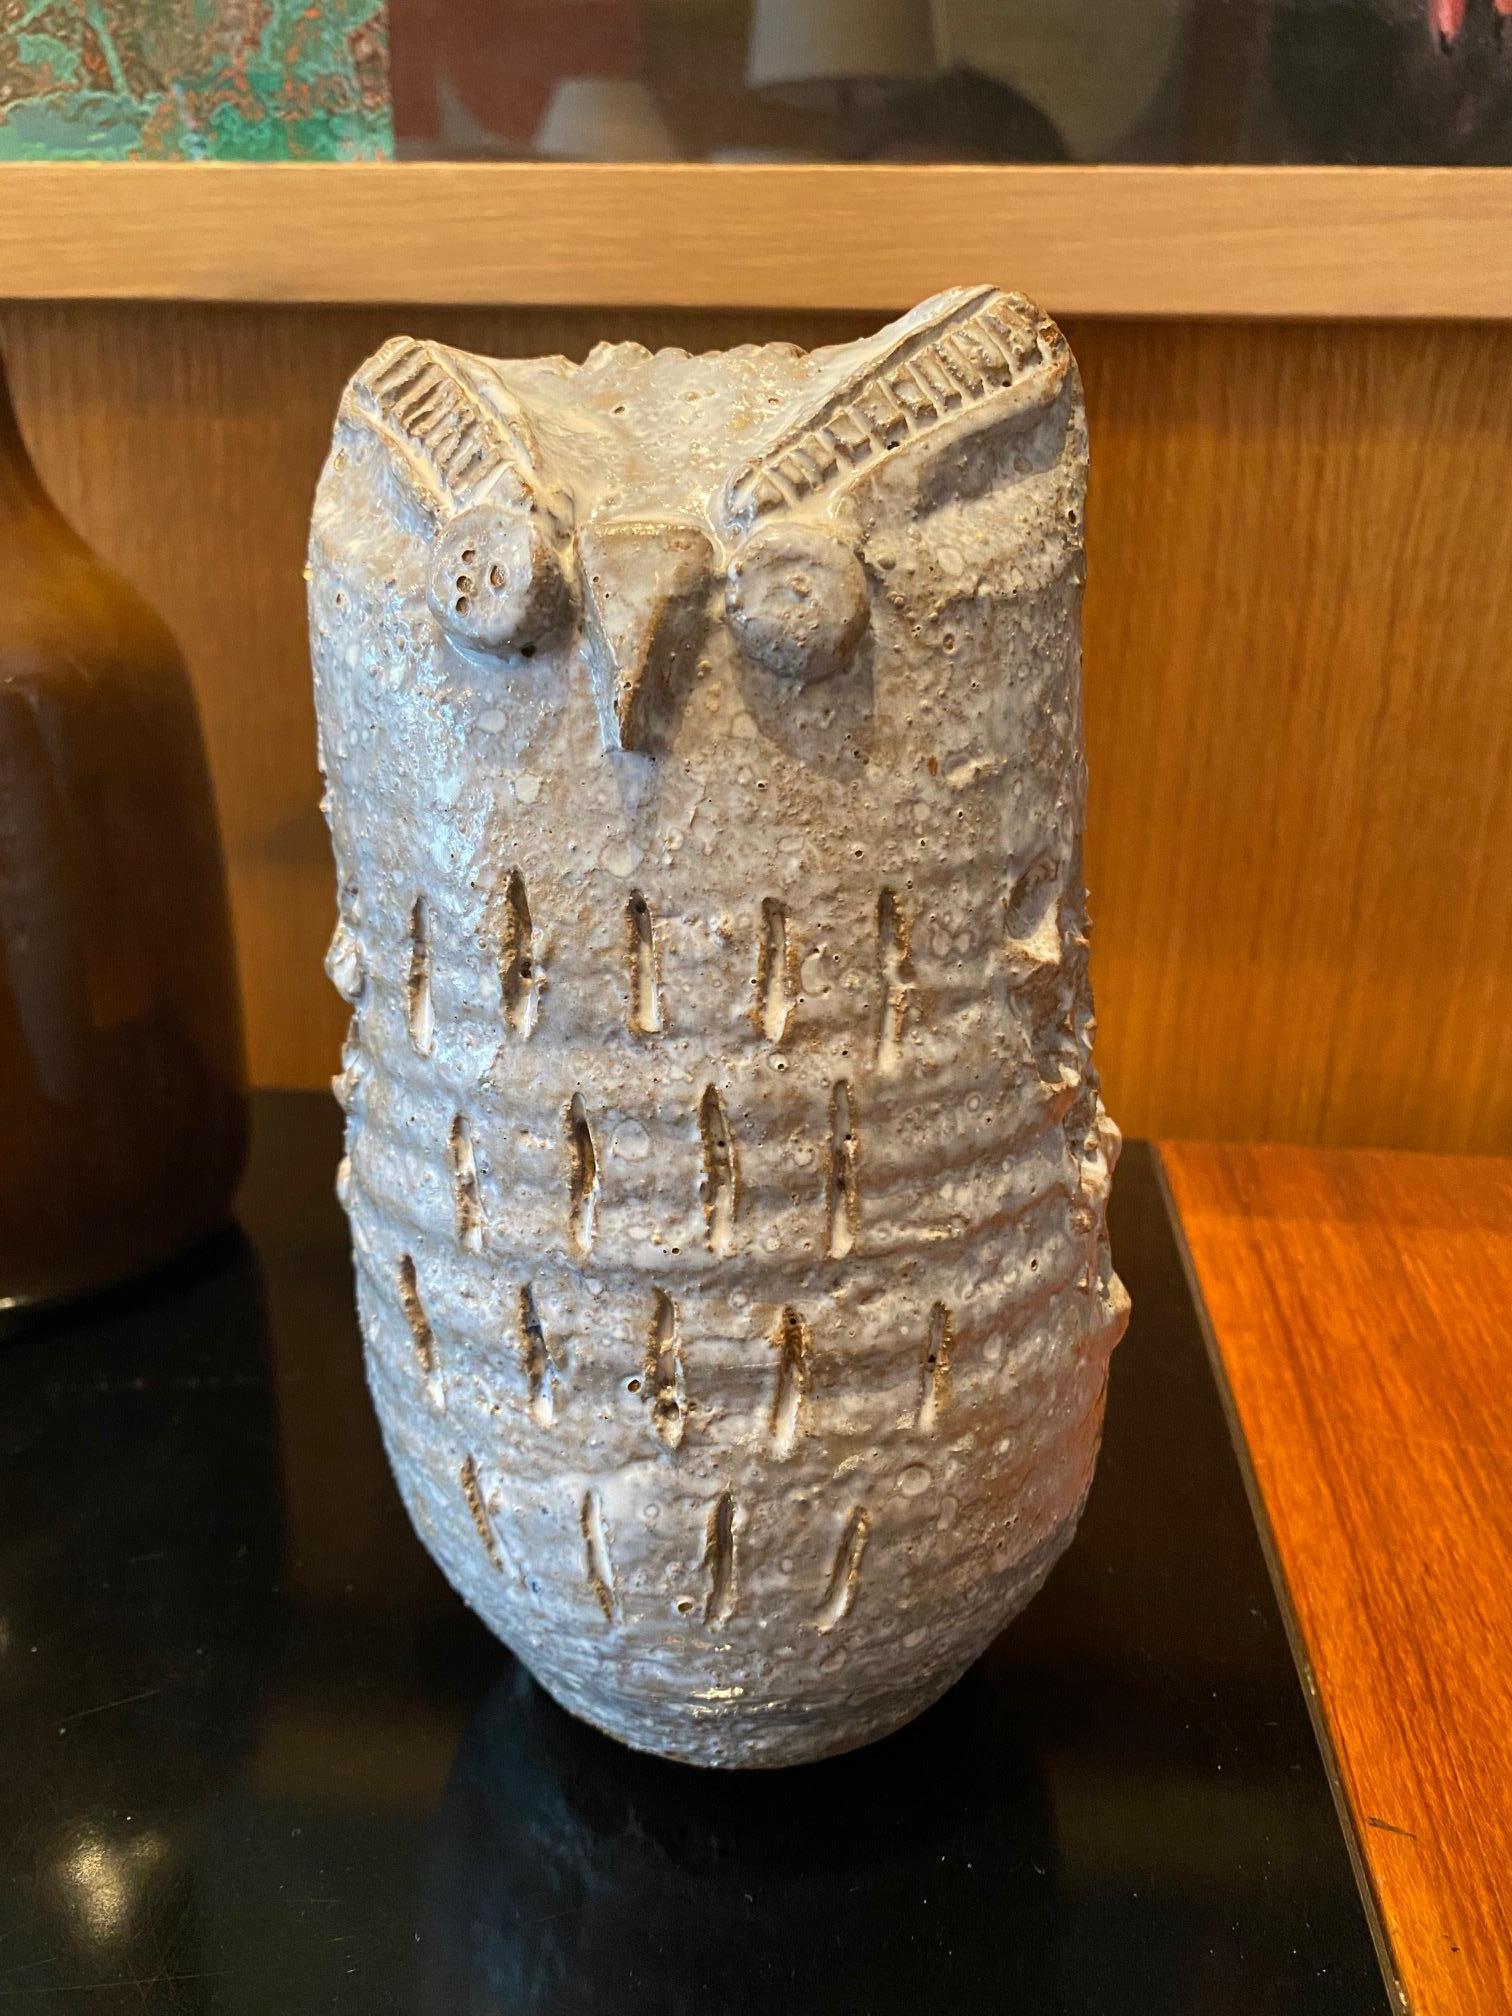 Ceramic sculpture representing an owl by Les Argonautes, France, 1960s
Les Argonautes (Frédérique Bourguet and Isabelle Ferlay), French workshop created in Vallauris, south of France, in 1953 and active until the death of Frederique Bourguet in